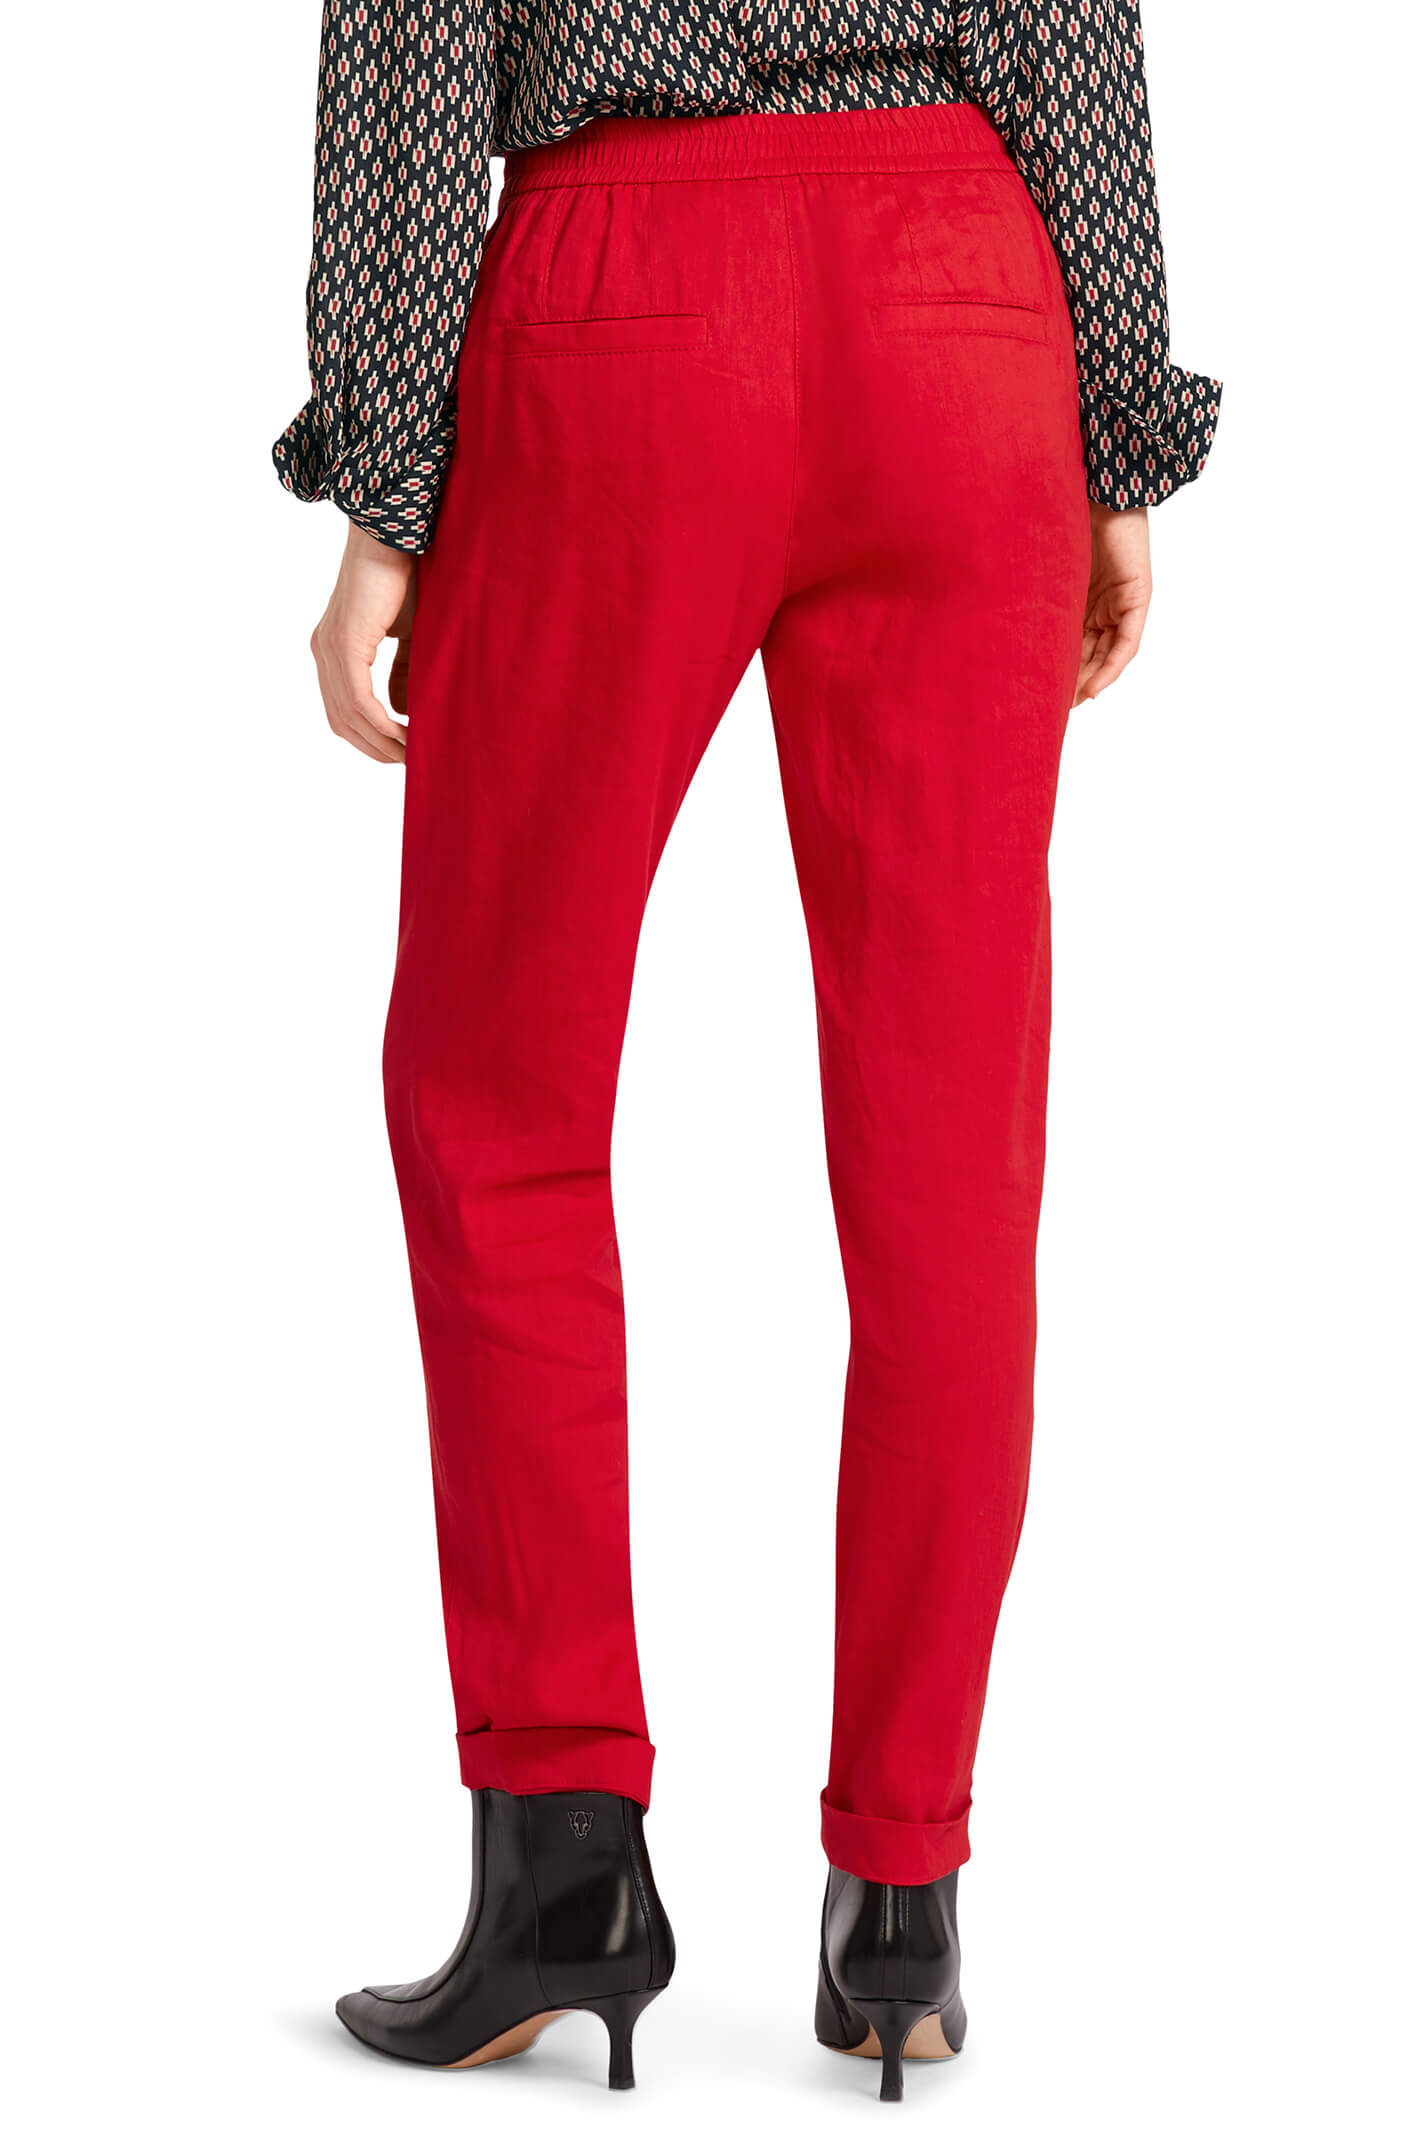 Buy Dark Red Textured Stripe Coord Trousers 12R  Trousers  Argos